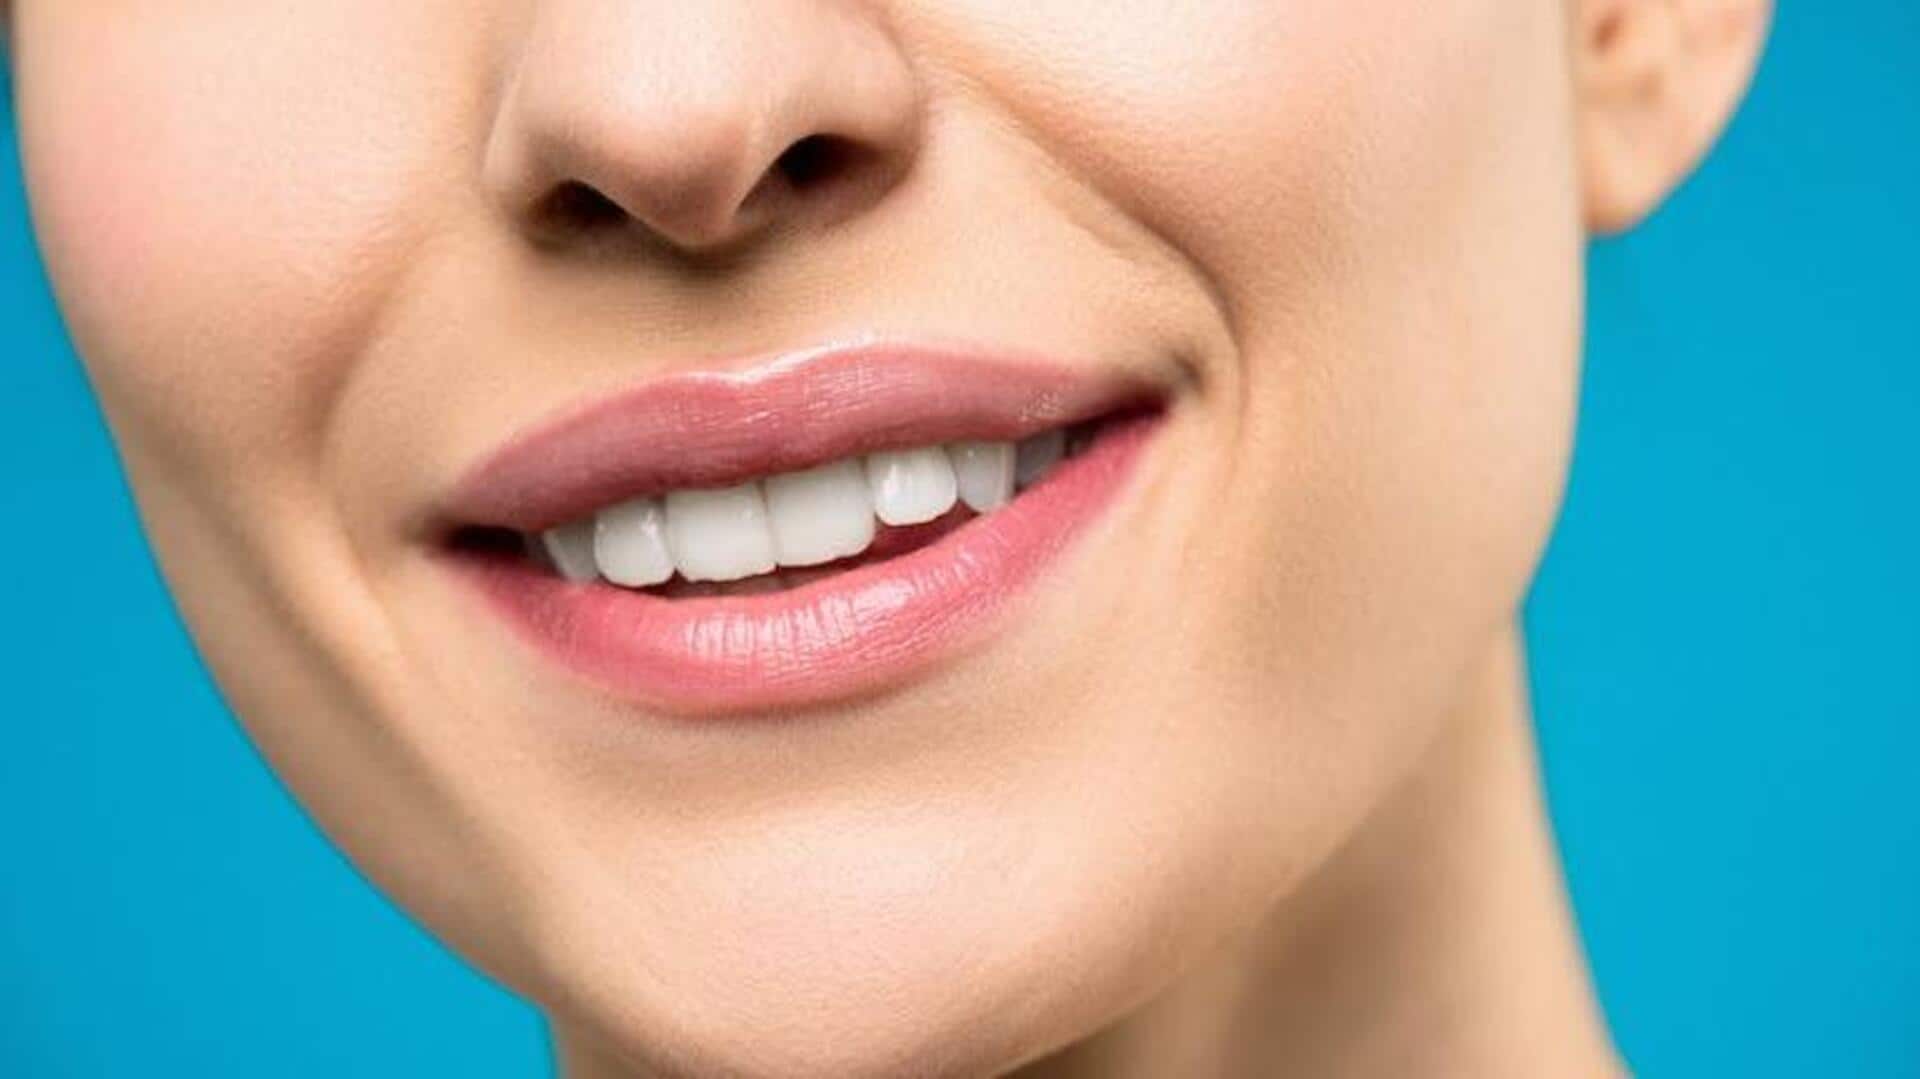 Expert reveals tips on how you can whiten your teeth